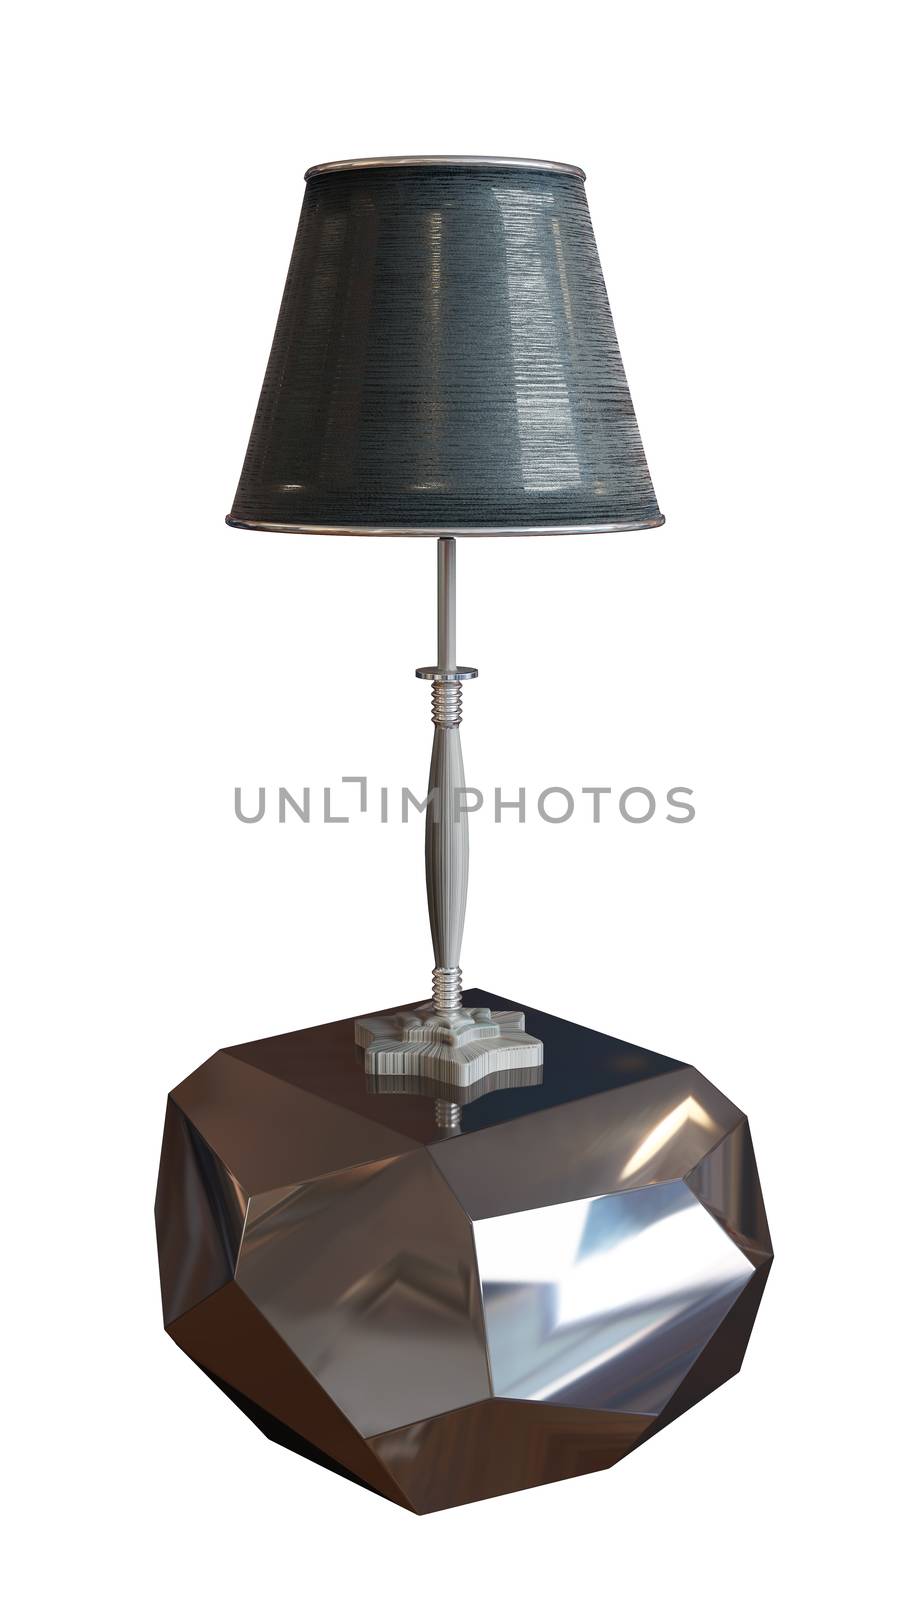 Black lamp with lampshade sitting on a metallic or glass, silvery pedestal. 3D illustration isolated against a white background